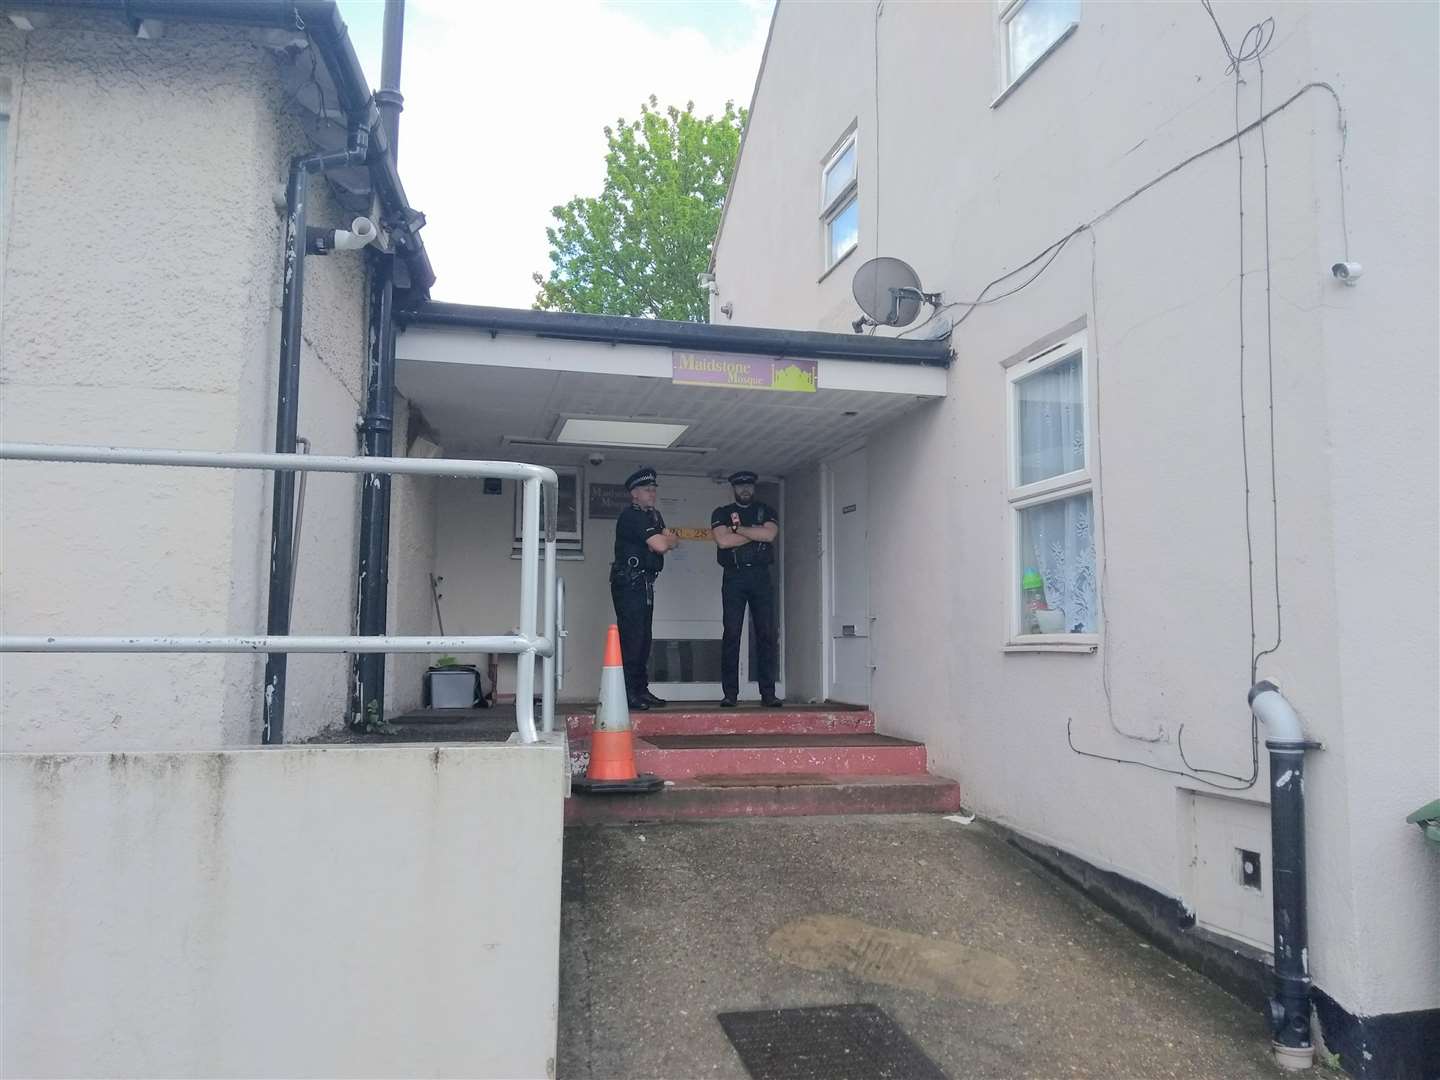 Police have set up a cordon outside Maidstone Mosque. (1709395)